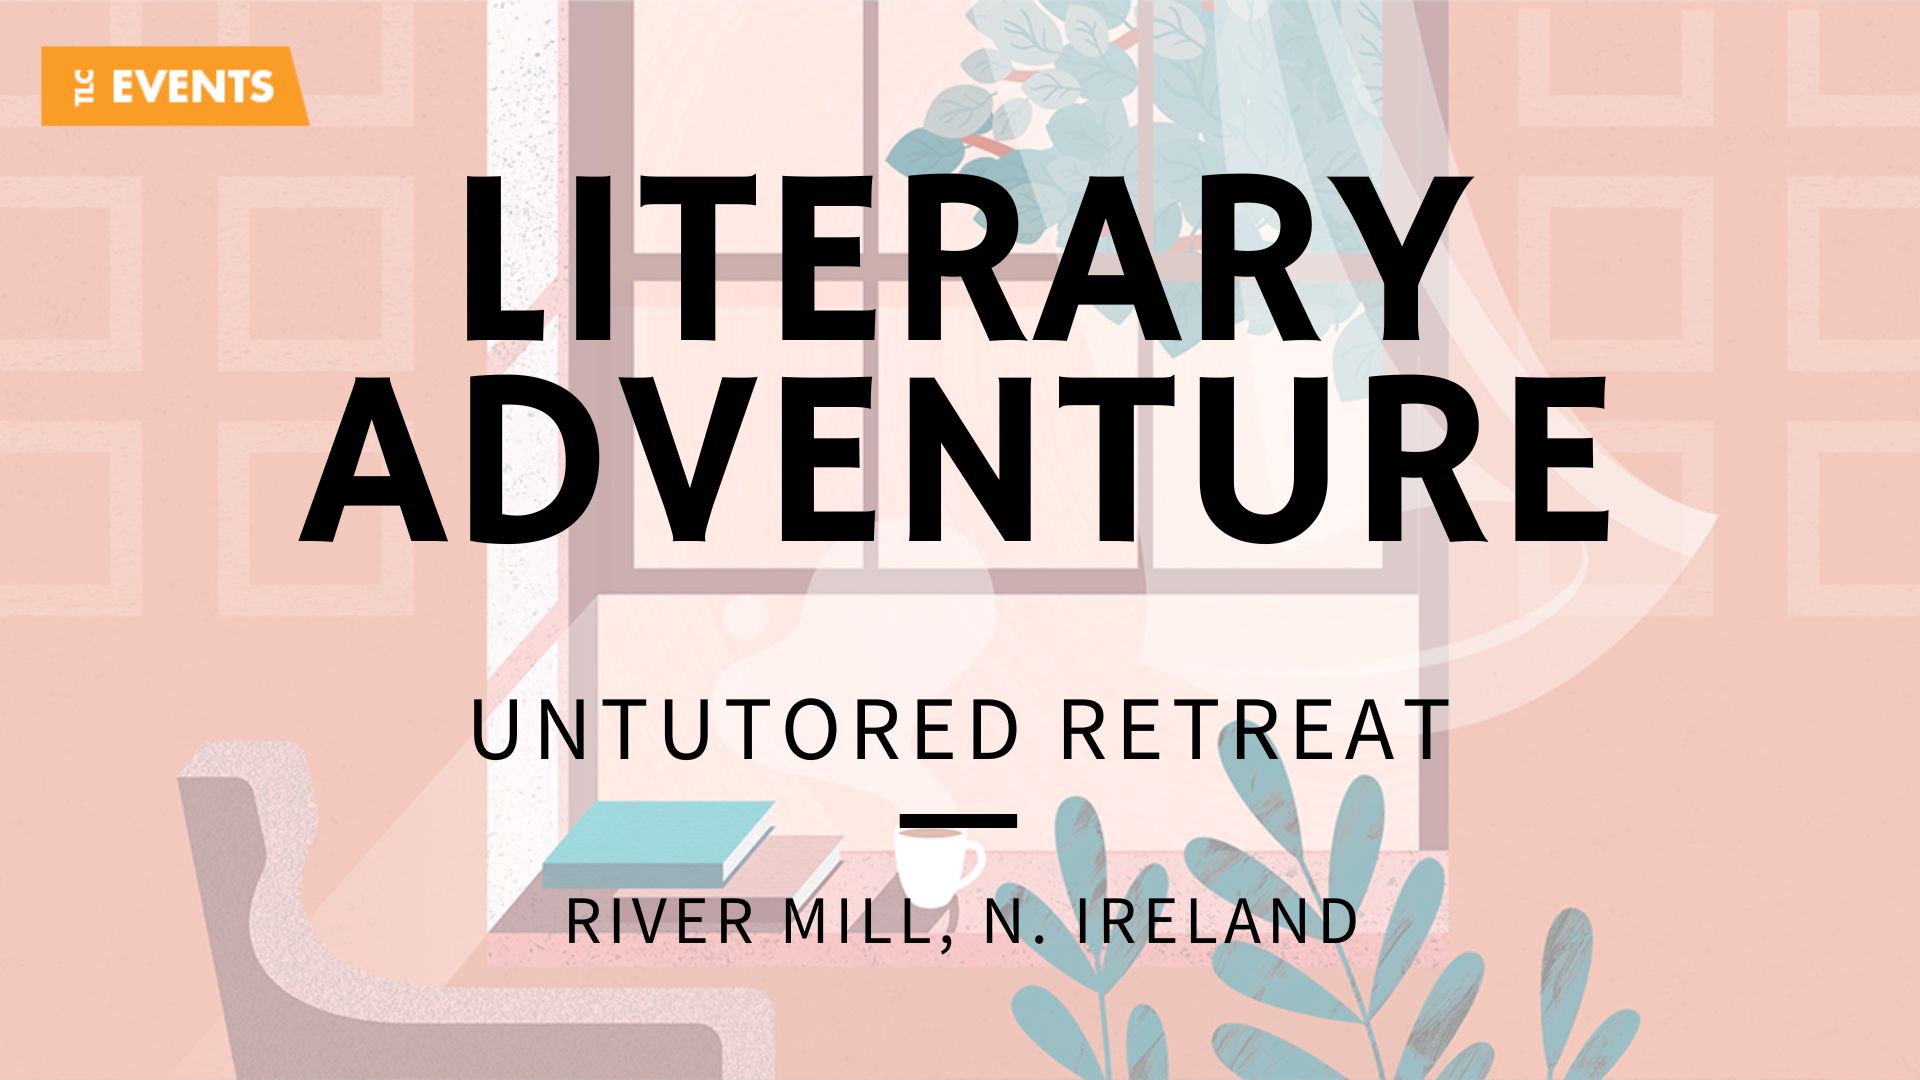 Booking poster for the Spring 2023 Literary Adventure writing retreat at River Mill